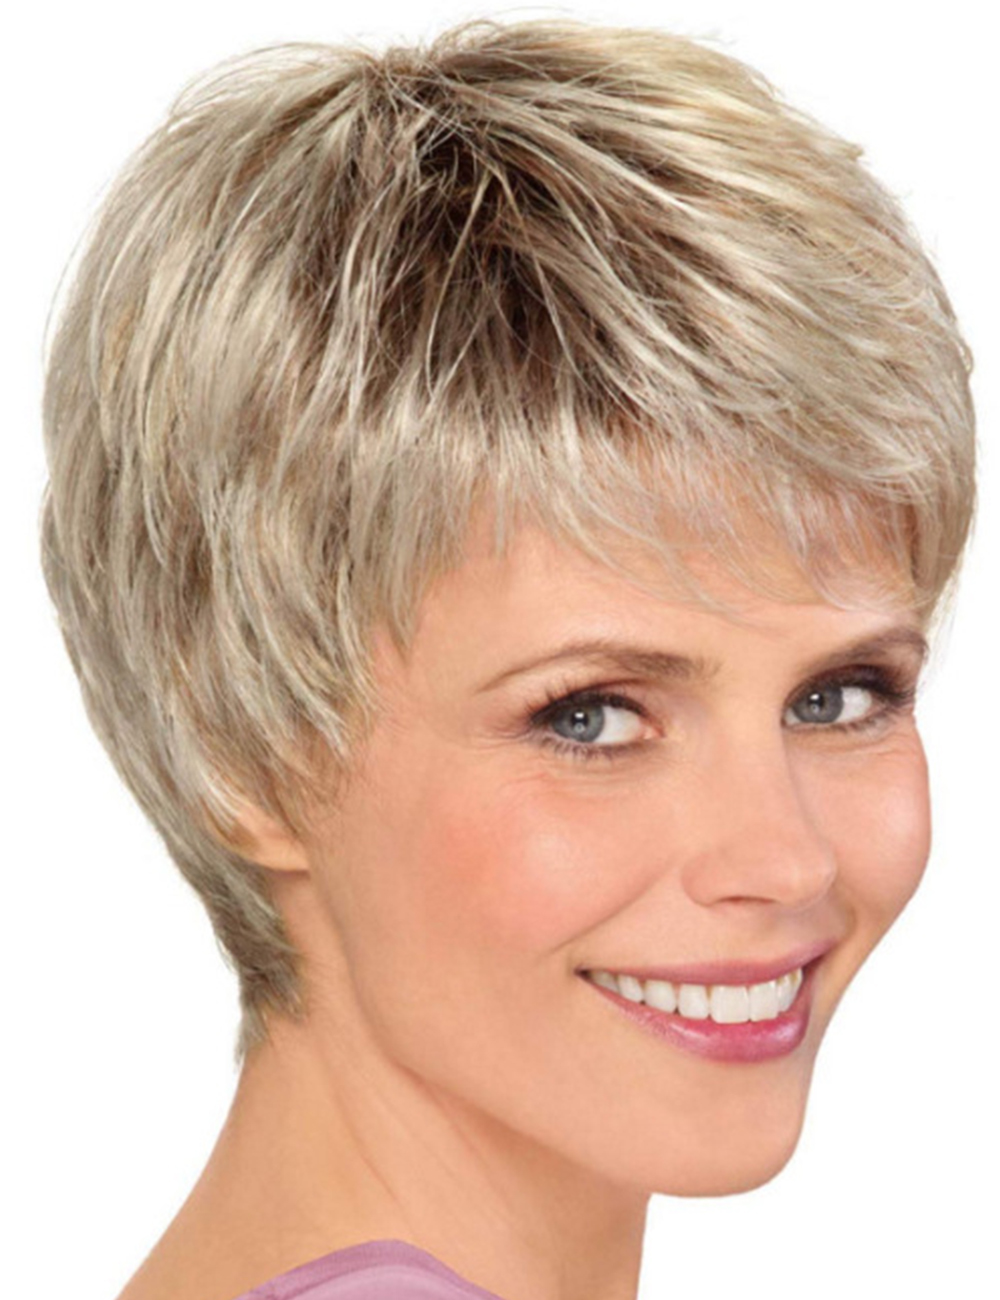 Short Choppy Layered Synthetic Hair Women Capless Wigs 10Inches